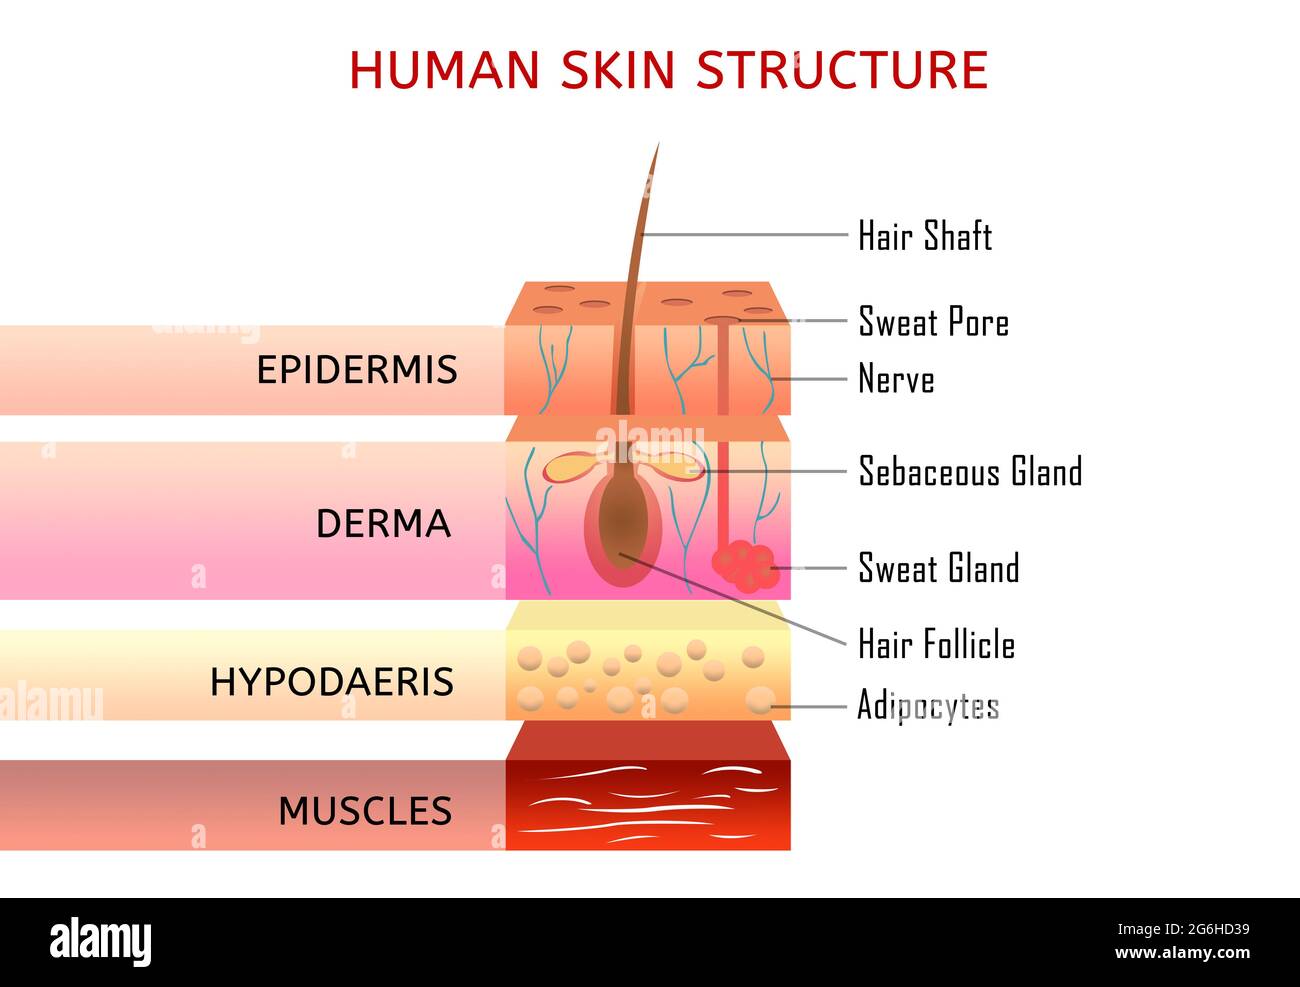 Illustration of Human's skin with different sections and name of every single component. Stock Photo